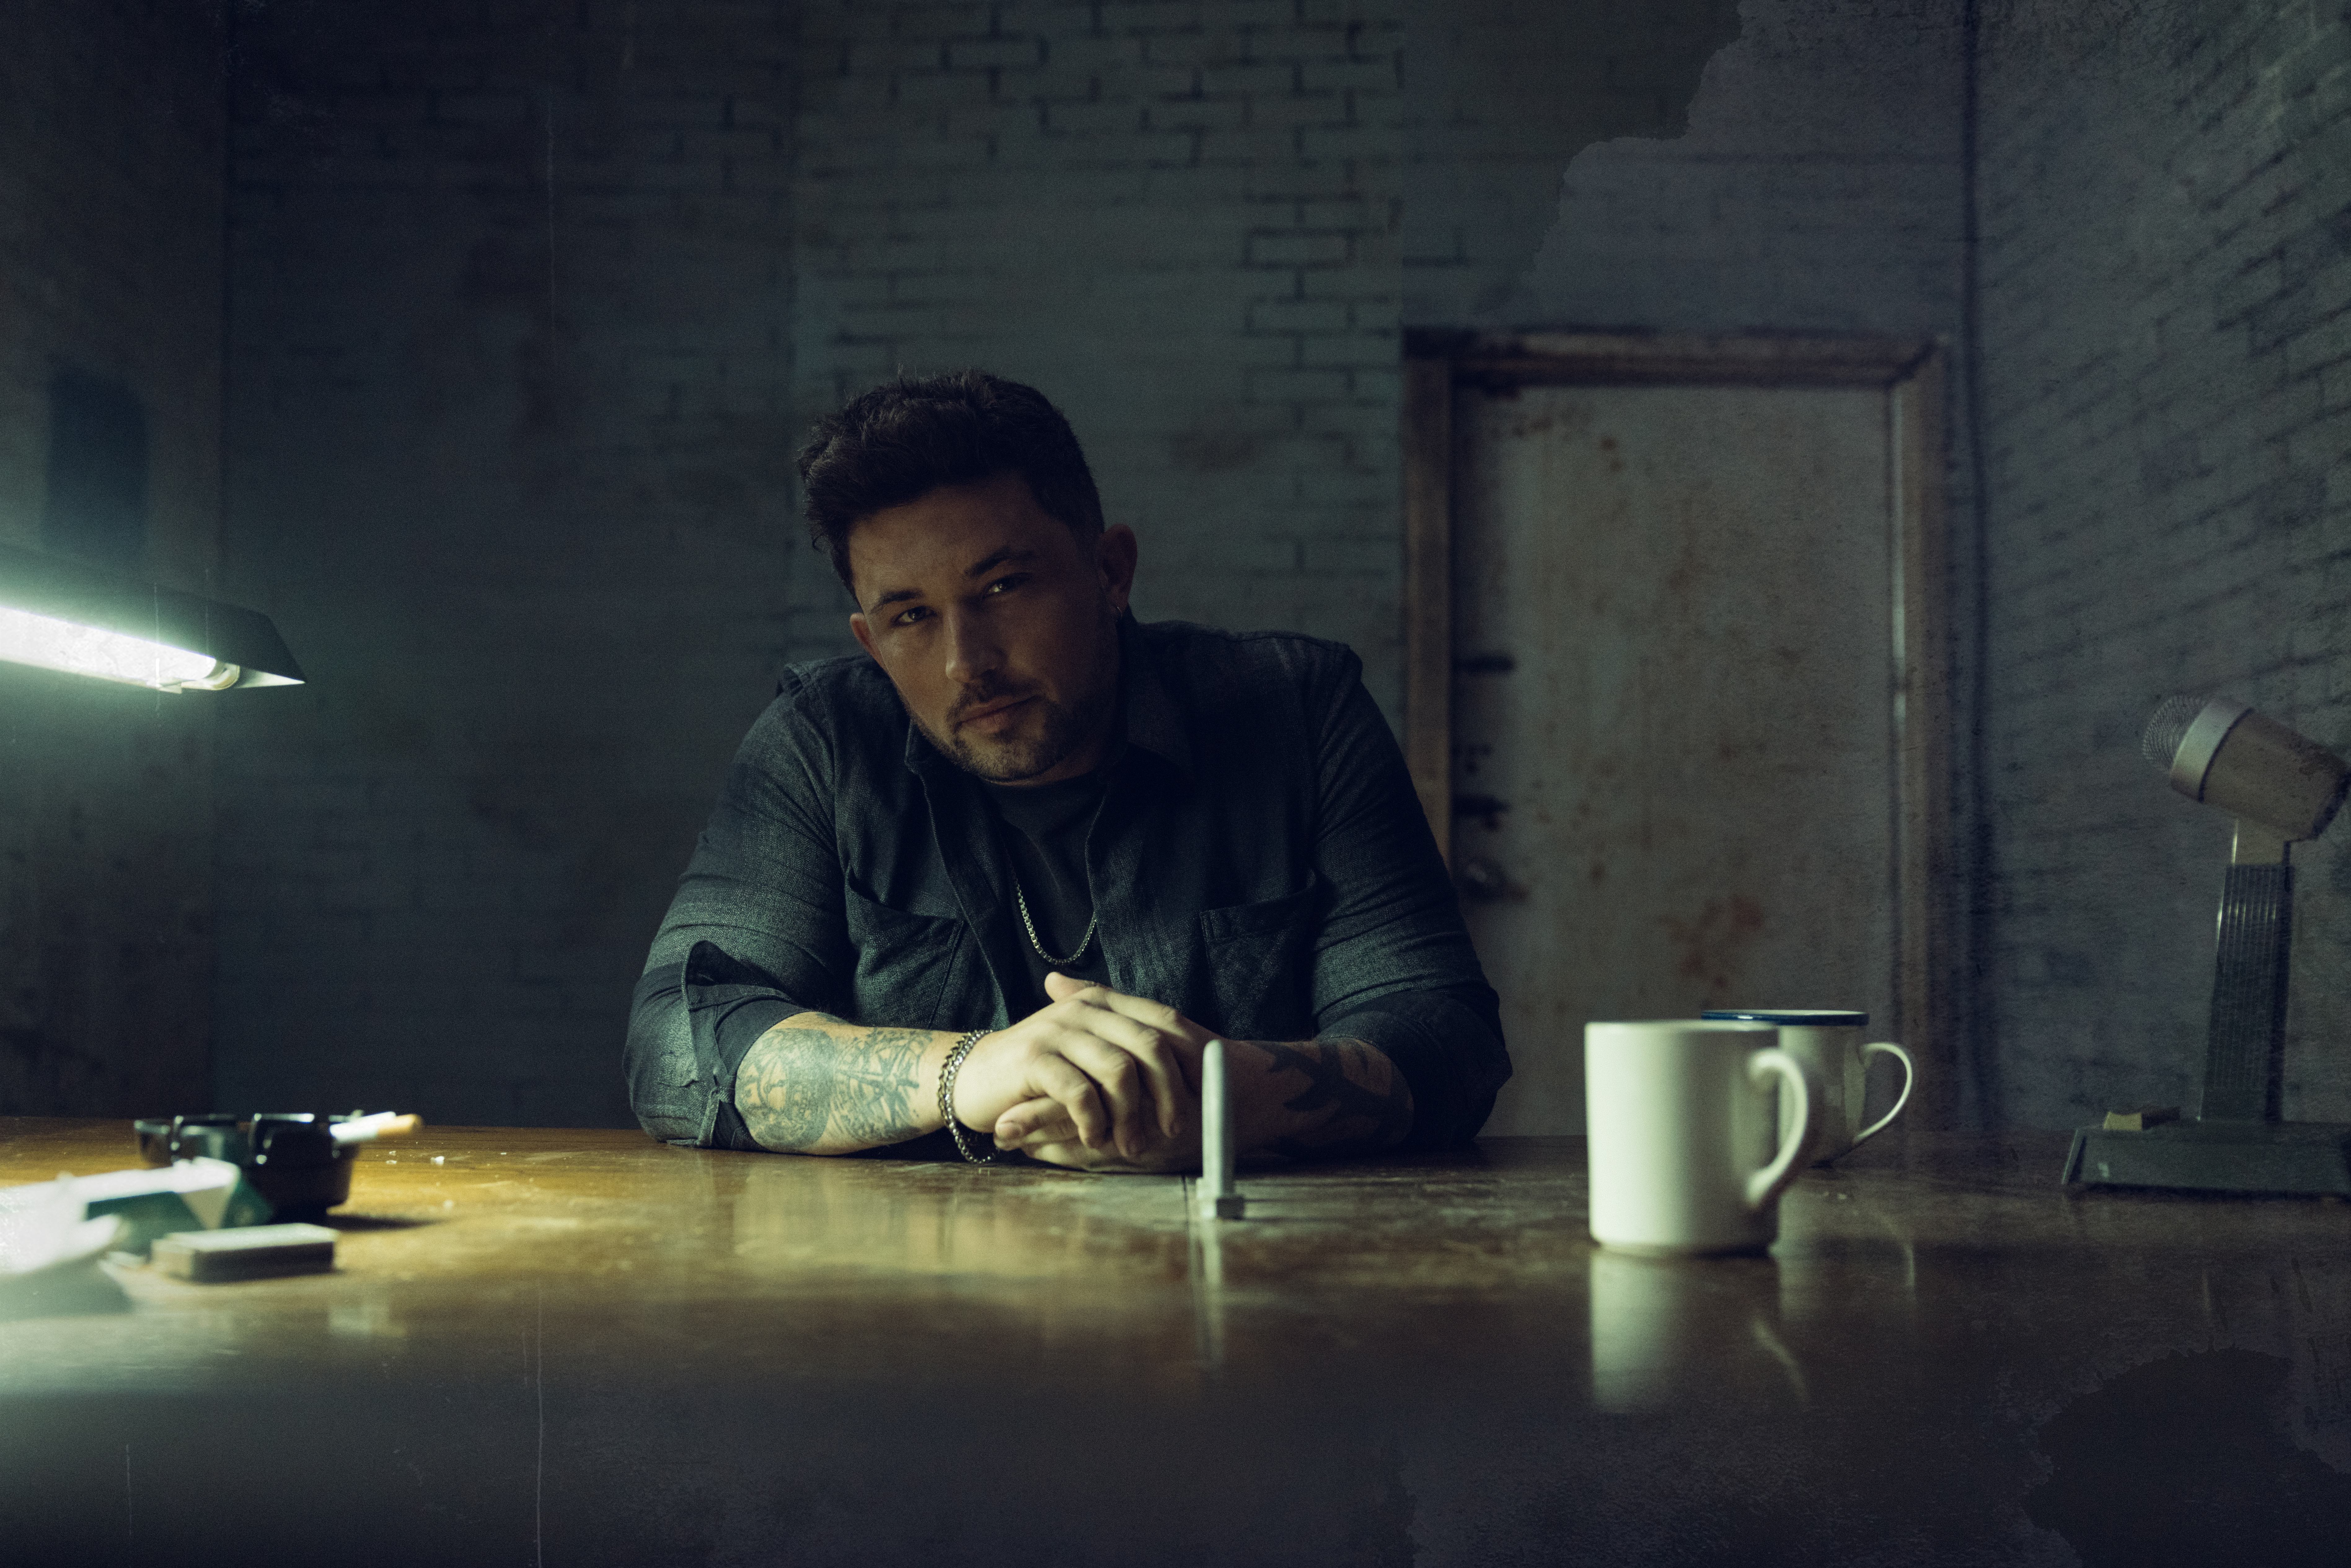 MICHAEL RAY’S MISDIRECTIVE “GET HER BACK” CLIP